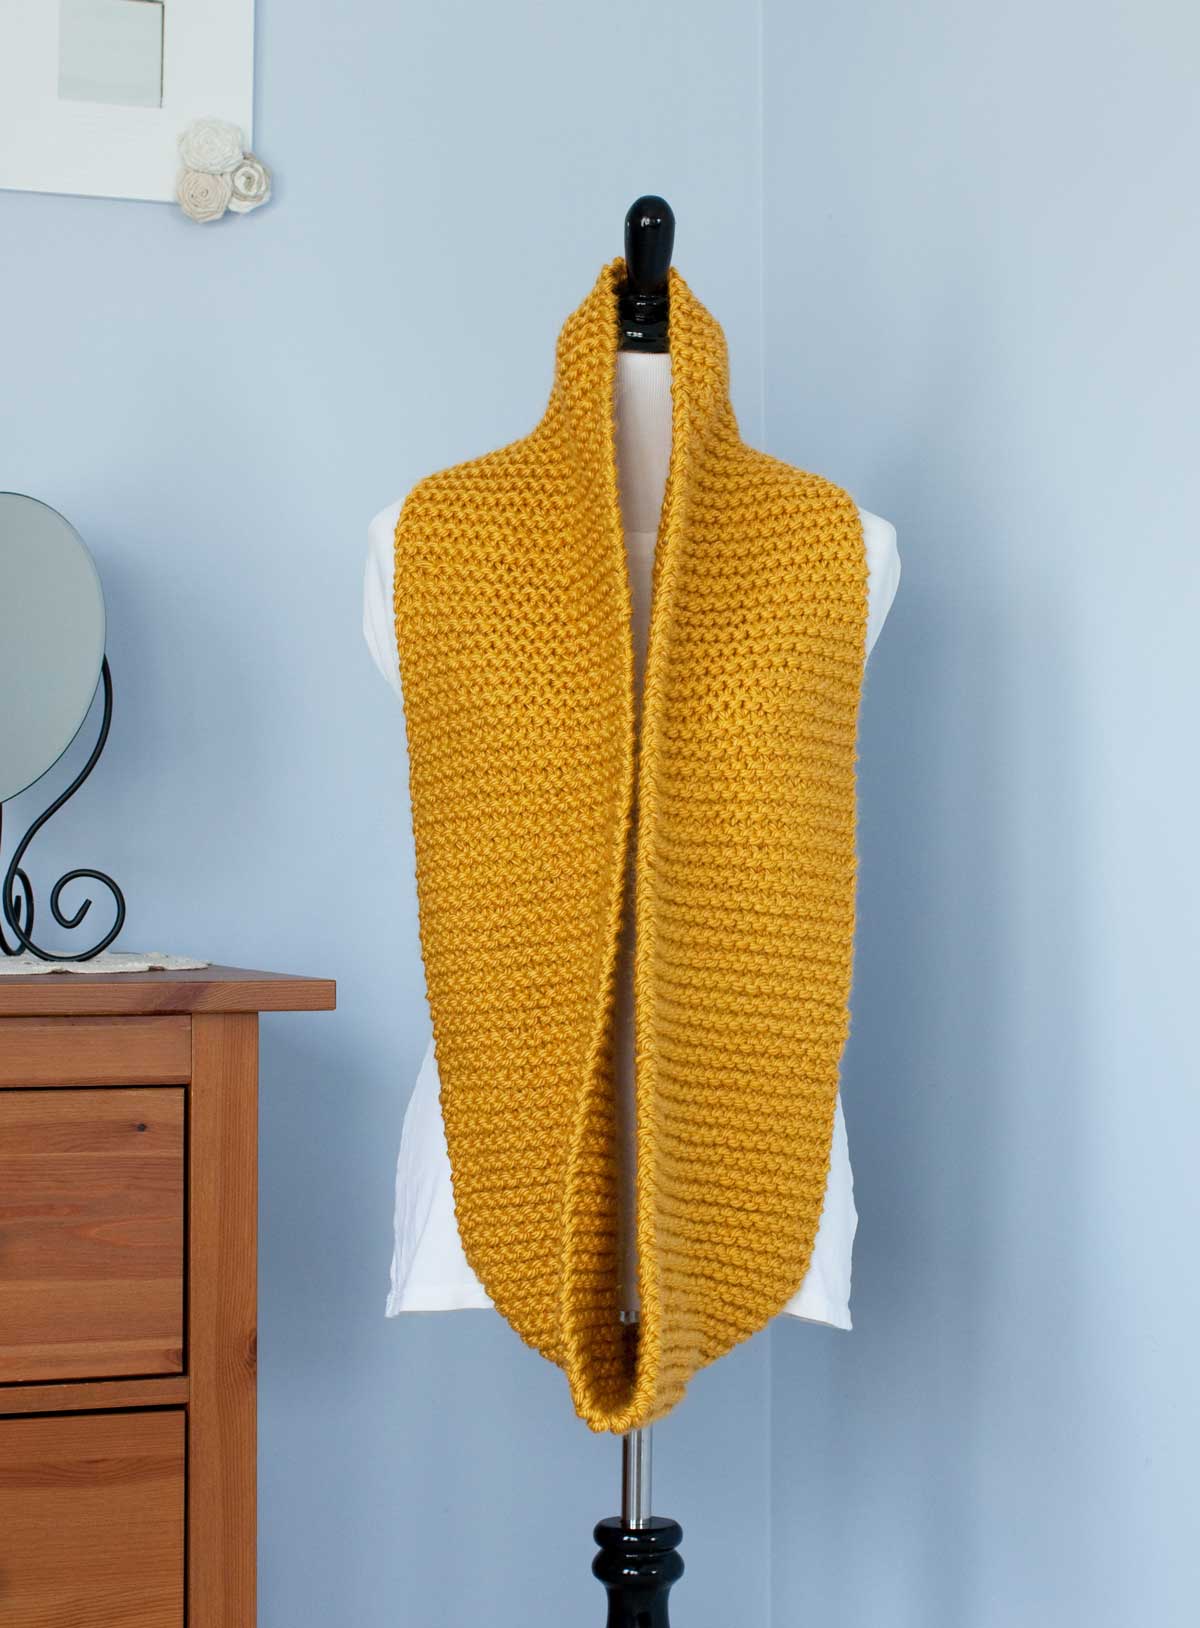 Mustard yellow scarf shown at full width hung around the neck of a dress-makers dummy.